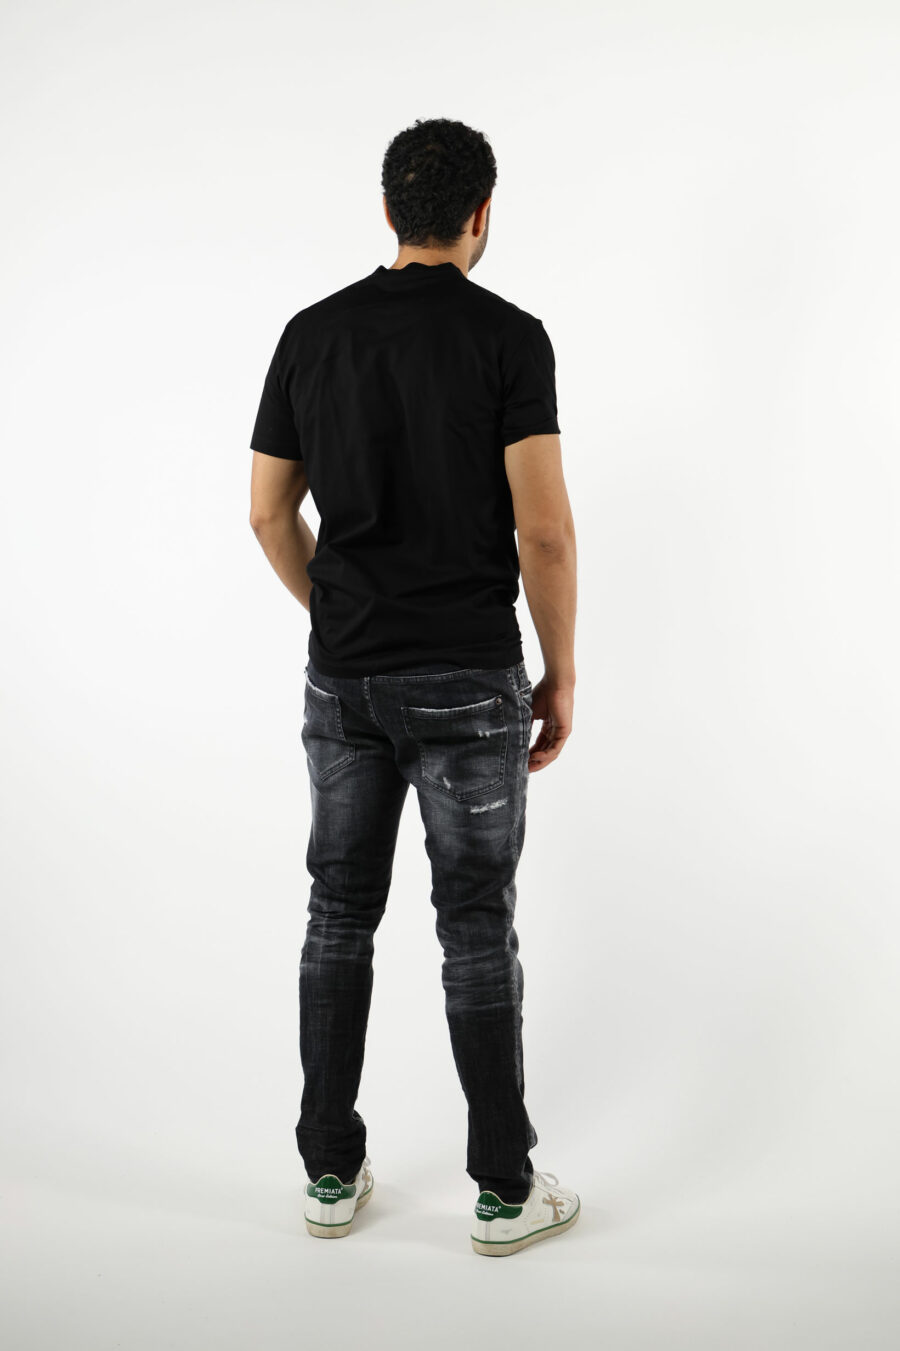 Black "skater jean" jeans with patch and semi-worn - 111293